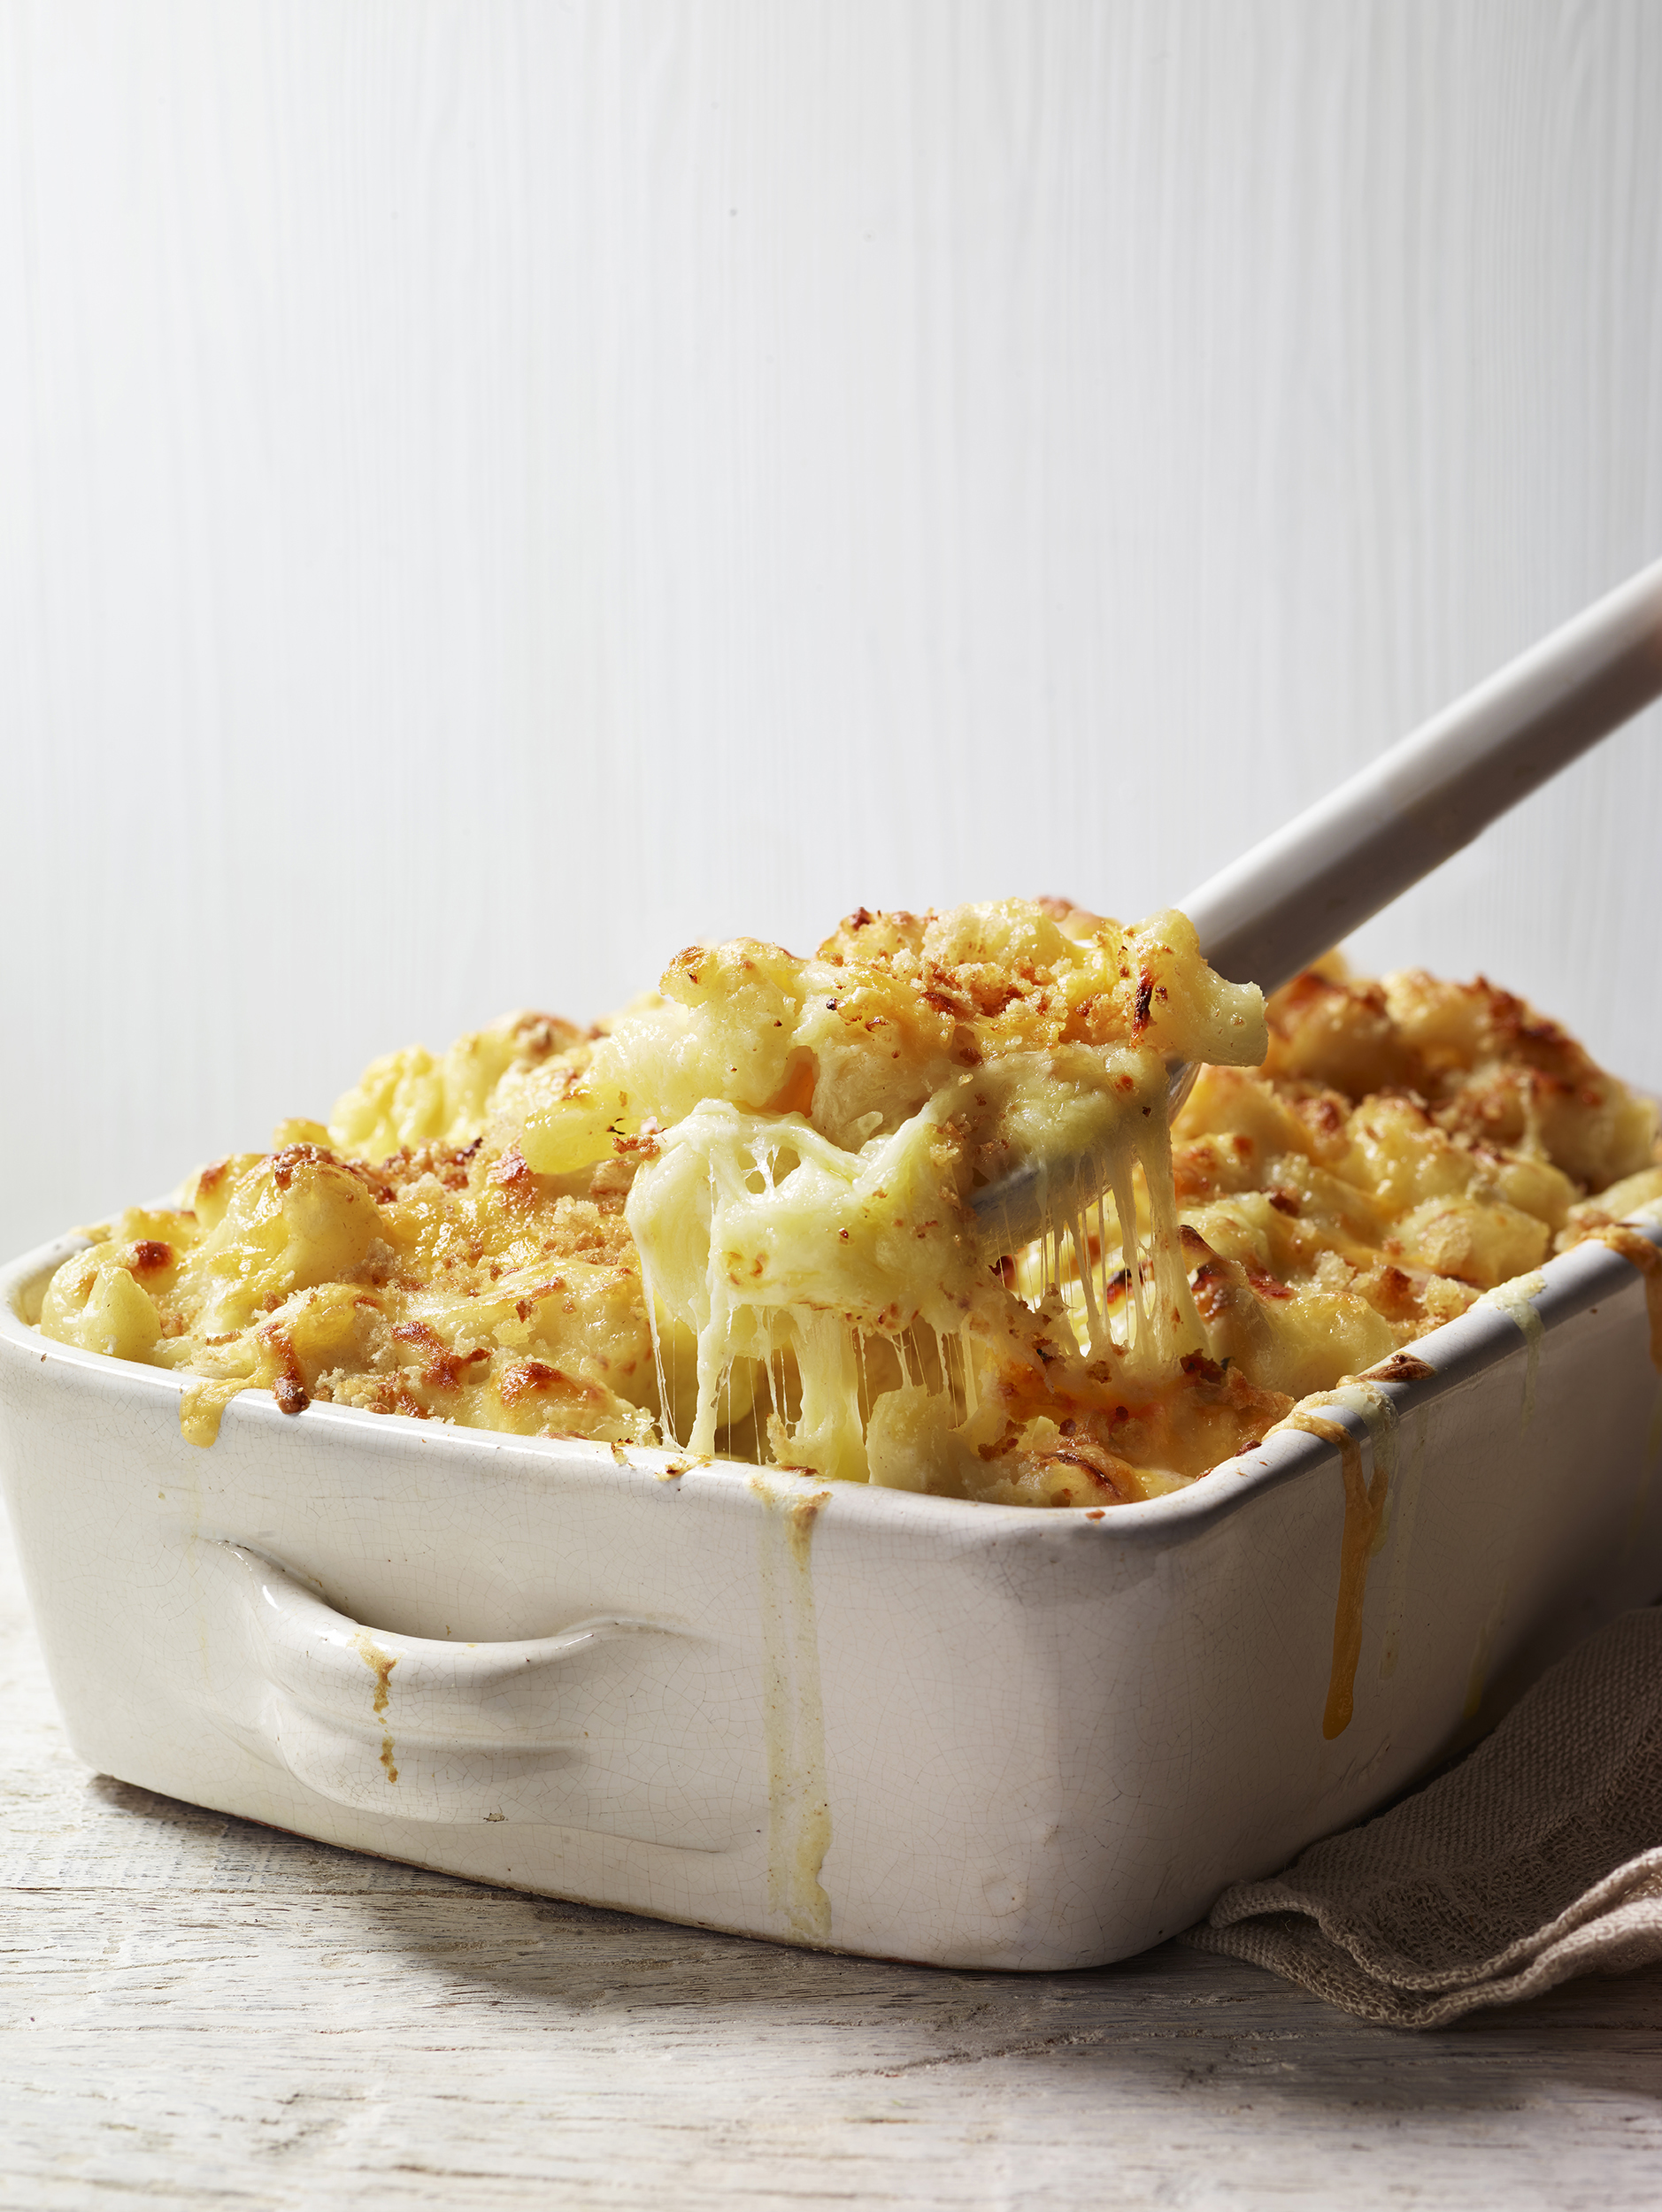 Chelsea Bloxsome | Food Photographer London Mac cheese pull